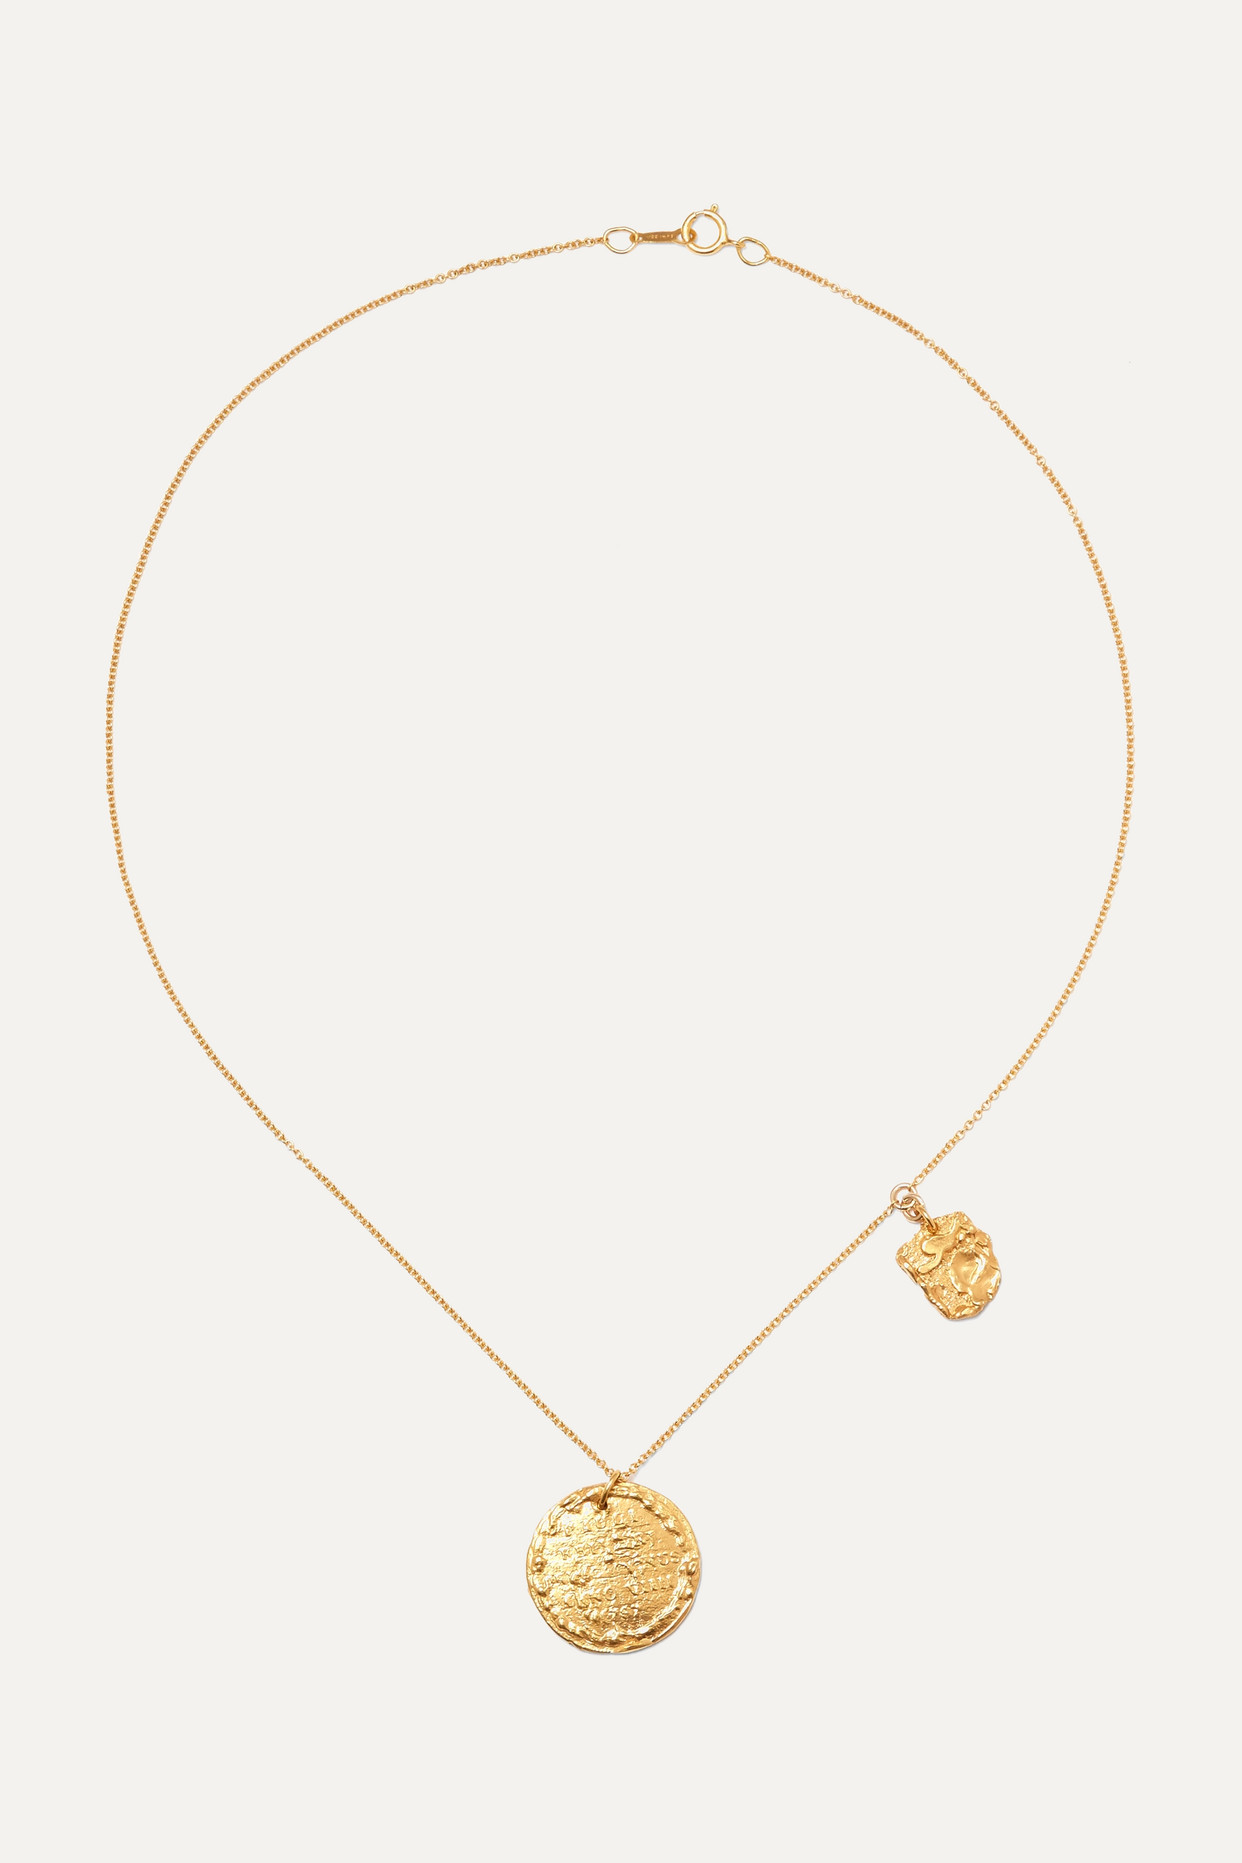 + Net Sustain Summer Night Gold-Plated Necklace